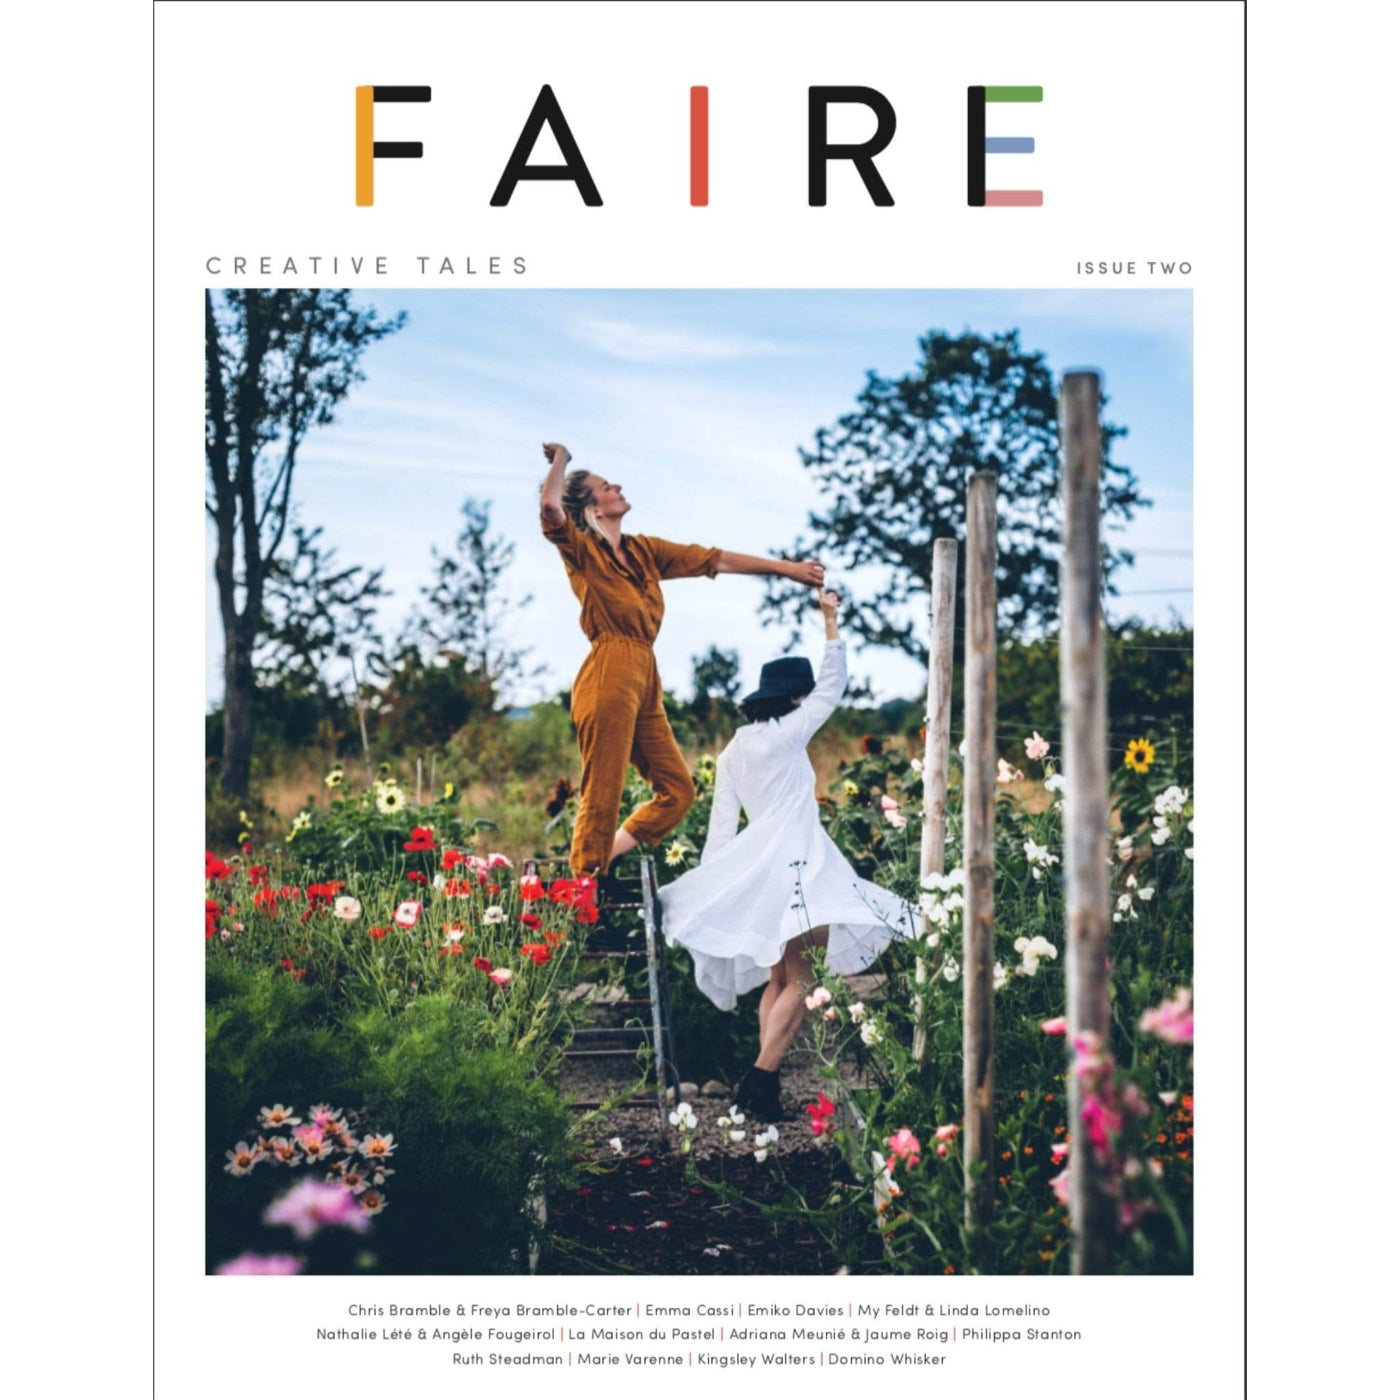 The cover of Faire Issue two features two white women dancing in a flower garden on a sunny day.